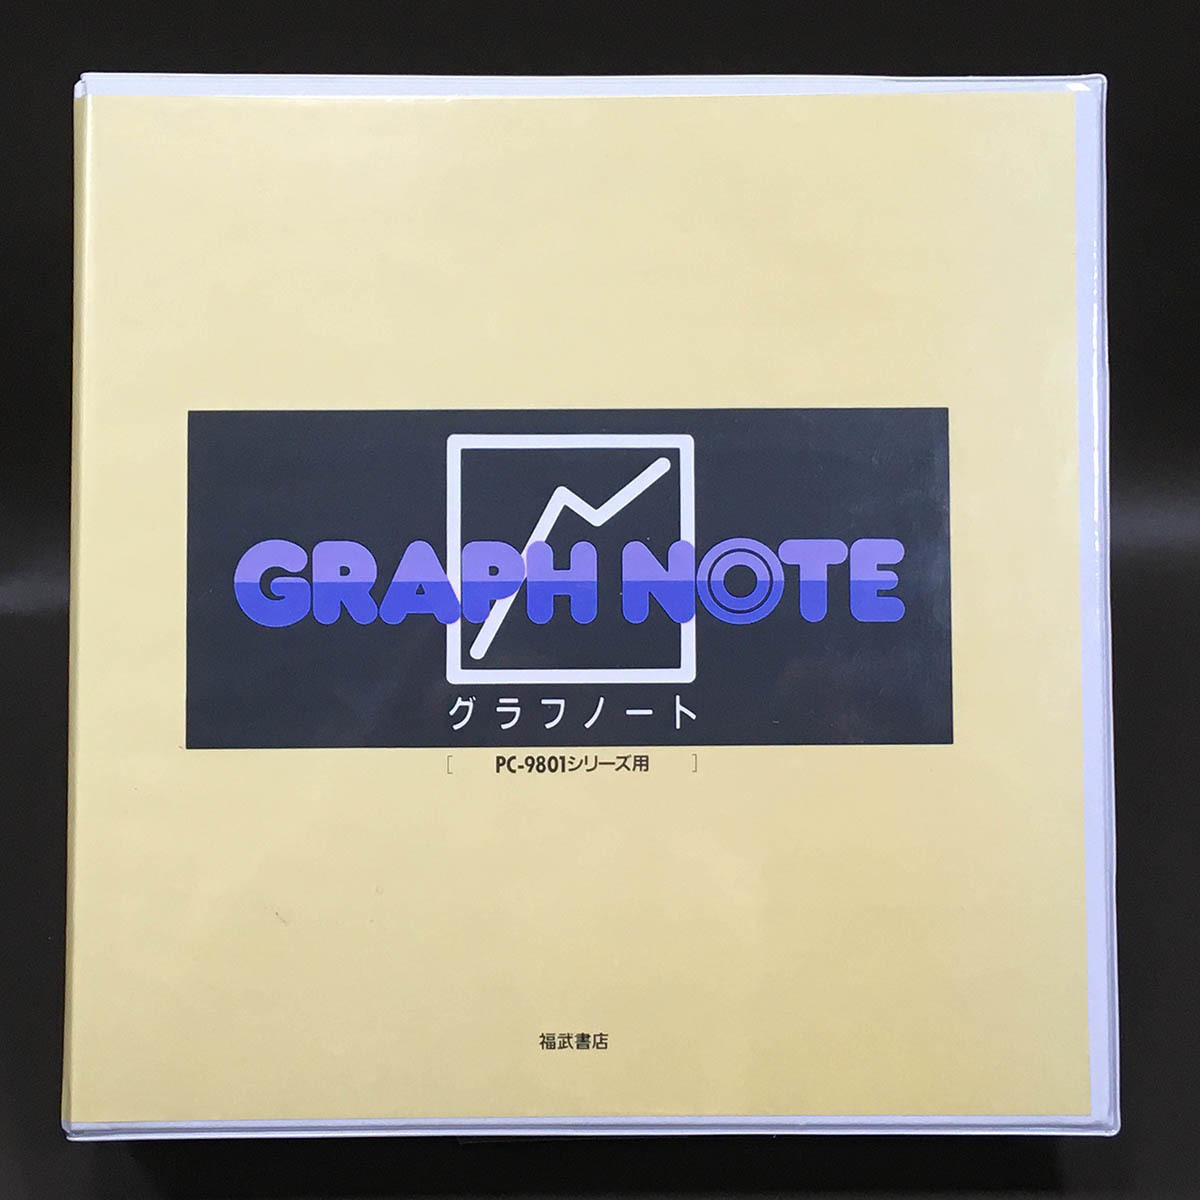  luck . bookstore lGRAPH NOTElPC-9801 series for l2HDl75551Ul graph Note lbenesel31592